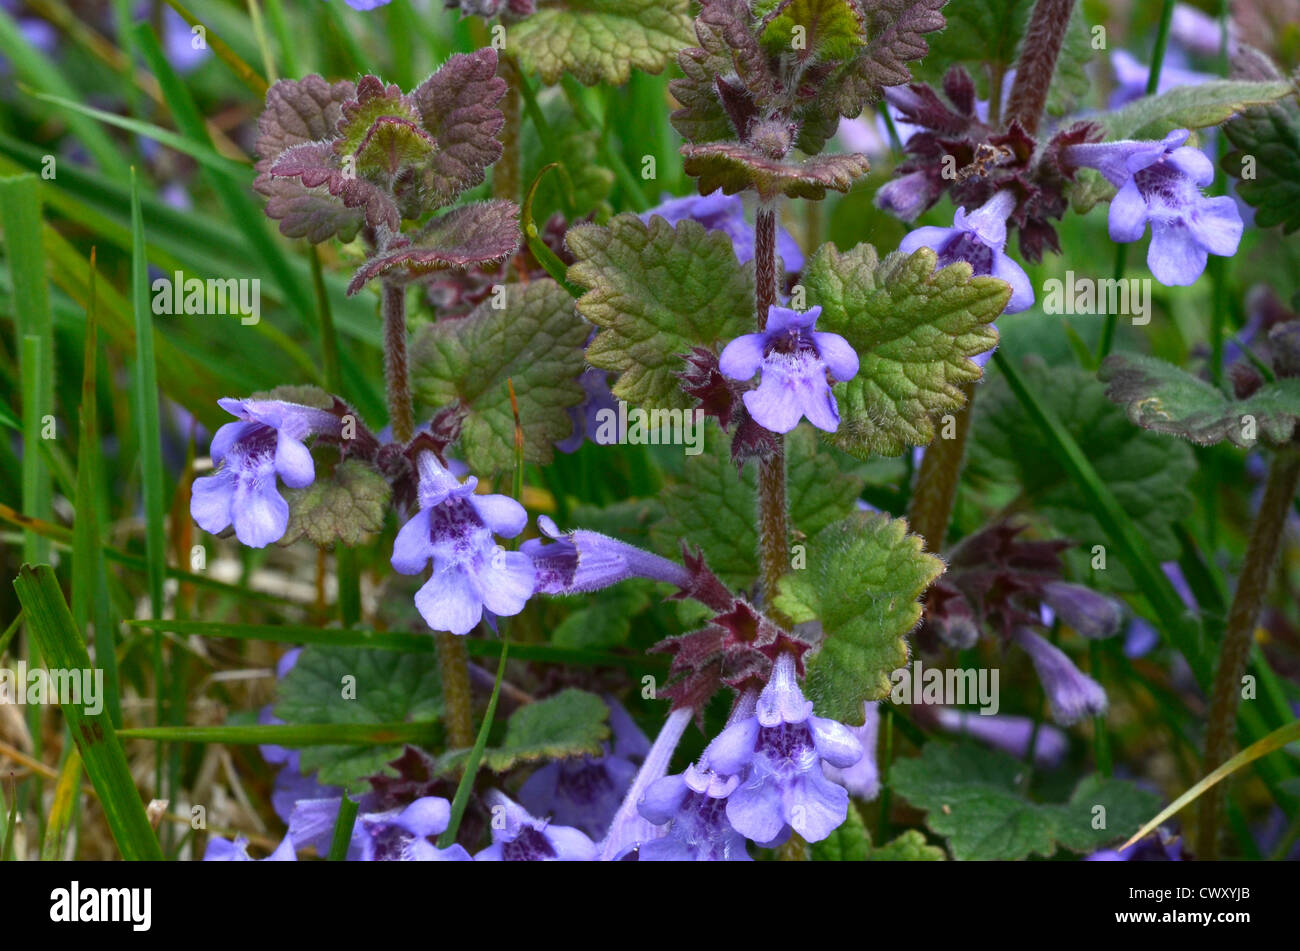 Foliage and flowers of Ground Ivy / Glechoma hederacea. Leaves have a minty flavour and were used as a tea substitute. Stock Photo